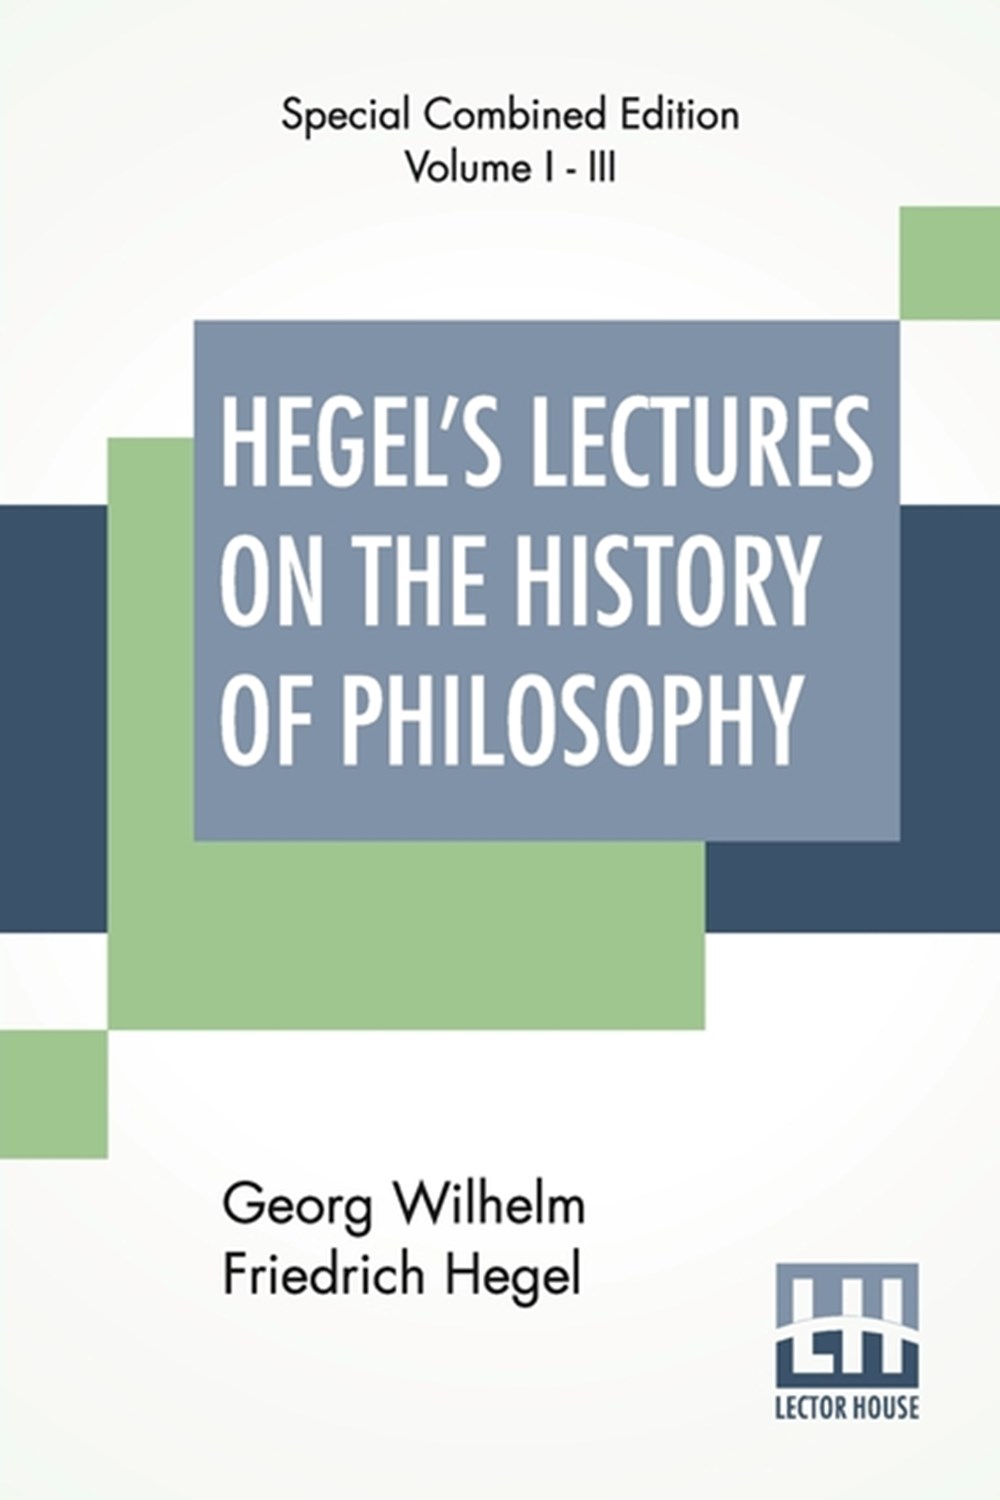 Hegel's Lectures On The History Of Philosophy (Complete): Complete Edition Of Three Volumes Trans. F